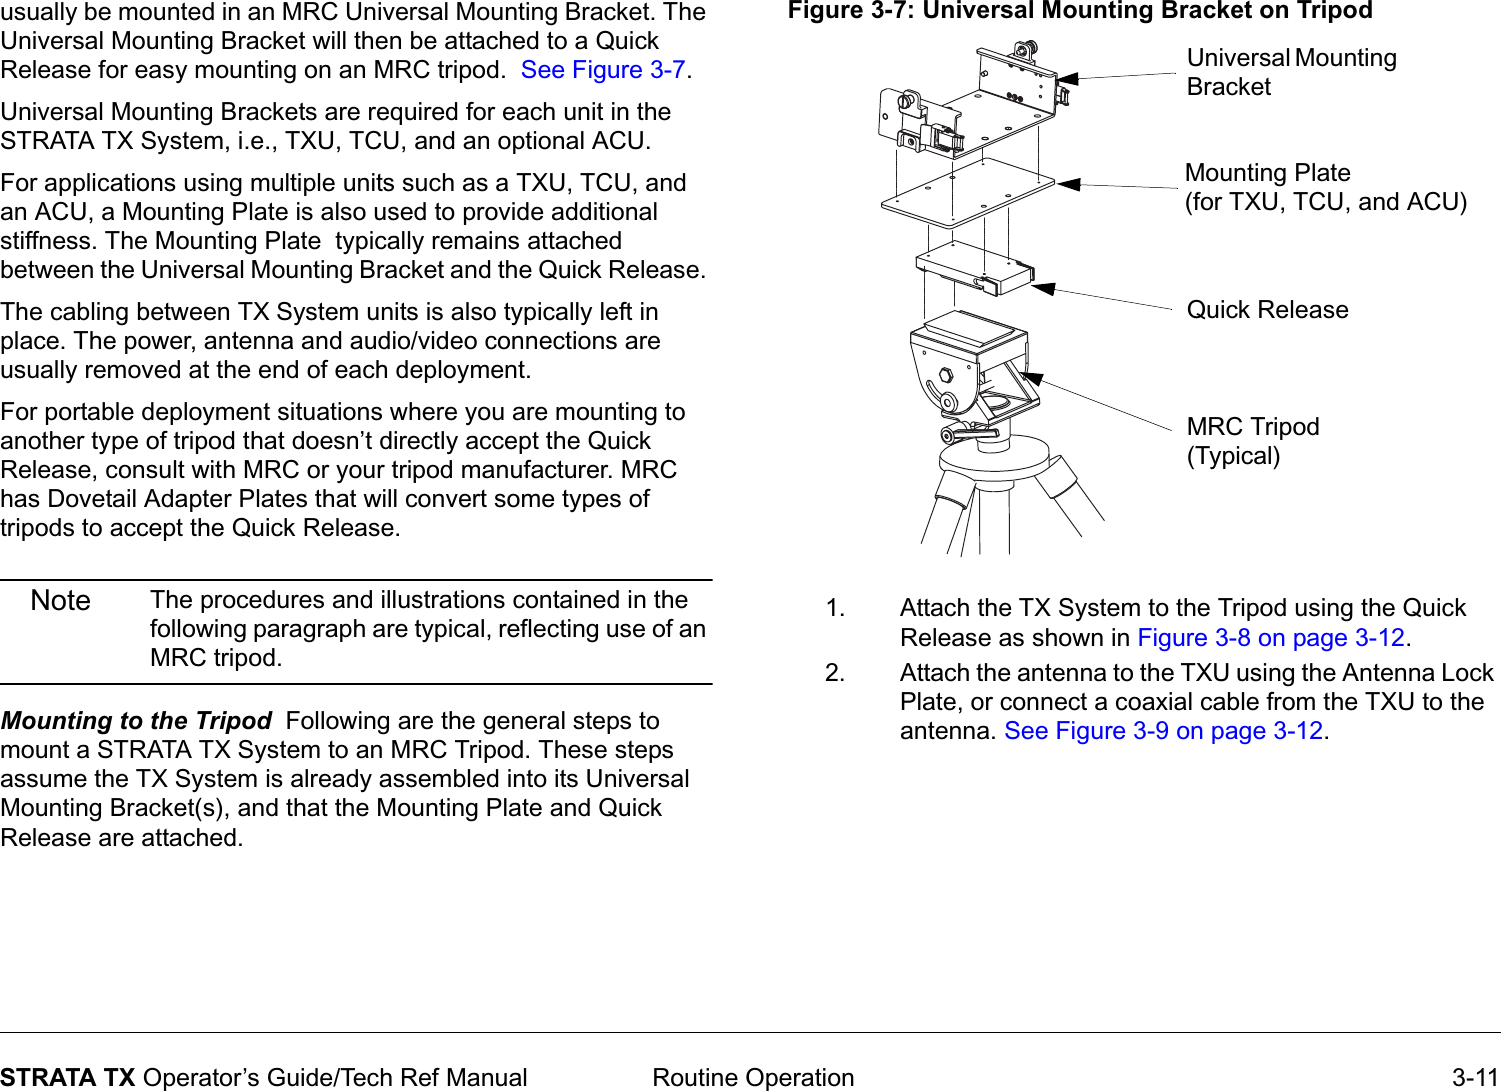  Routine Operation 3-11STRATA TX Operator’s Guide/Tech Ref Manualusually be mounted in an MRC Universal Mounting Bracket. The Universal Mounting Bracket will then be attached to a Quick Release for easy mounting on an MRC tripod.  See Figure 3-7. Universal Mounting Brackets are required for each unit in the STRATA TX System, i.e., TXU, TCU, and an optional ACU. For applications using multiple units such as a TXU, TCU, and an ACU, a Mounting Plate is also used to provide additional stiffness. The Mounting Plate  typically remains attached between the Universal Mounting Bracket and the Quick Release. The cabling between TX System units is also typically left in place. The power, antenna and audio/video connections are usually removed at the end of each deployment. For portable deployment situations where you are mounting to another type of tripod that doesn’t directly accept the Quick Release, consult with MRC or your tripod manufacturer. MRC has Dovetail Adapter Plates that will convert some types of tripods to accept the Quick Release.Note The procedures and illustrations contained in the following paragraph are typical, reflecting use of an MRC tripod.Mounting to the Tripod  Following are the general steps to mount a STRATA TX System to an MRC Tripod. These steps assume the TX System is already assembled into its Universal Mounting Bracket(s), and that the Mounting Plate and Quick Release are attached. Figure 3-7: Universal Mounting Bracket on Tripod 1. Attach the TX System to the Tripod using the Quick Release as shown in Figure 3-8 on page 3-12. 2. Attach the antenna to the TXU using the Antenna Lock Plate, or connect a coaxial cable from the TXU to the antenna. See Figure 3-9 on page 3-12. Universal Mounting BracketMounting Plate(for TXU, TCU, and ACU)Quick ReleaseMRC Tripod(Typical)